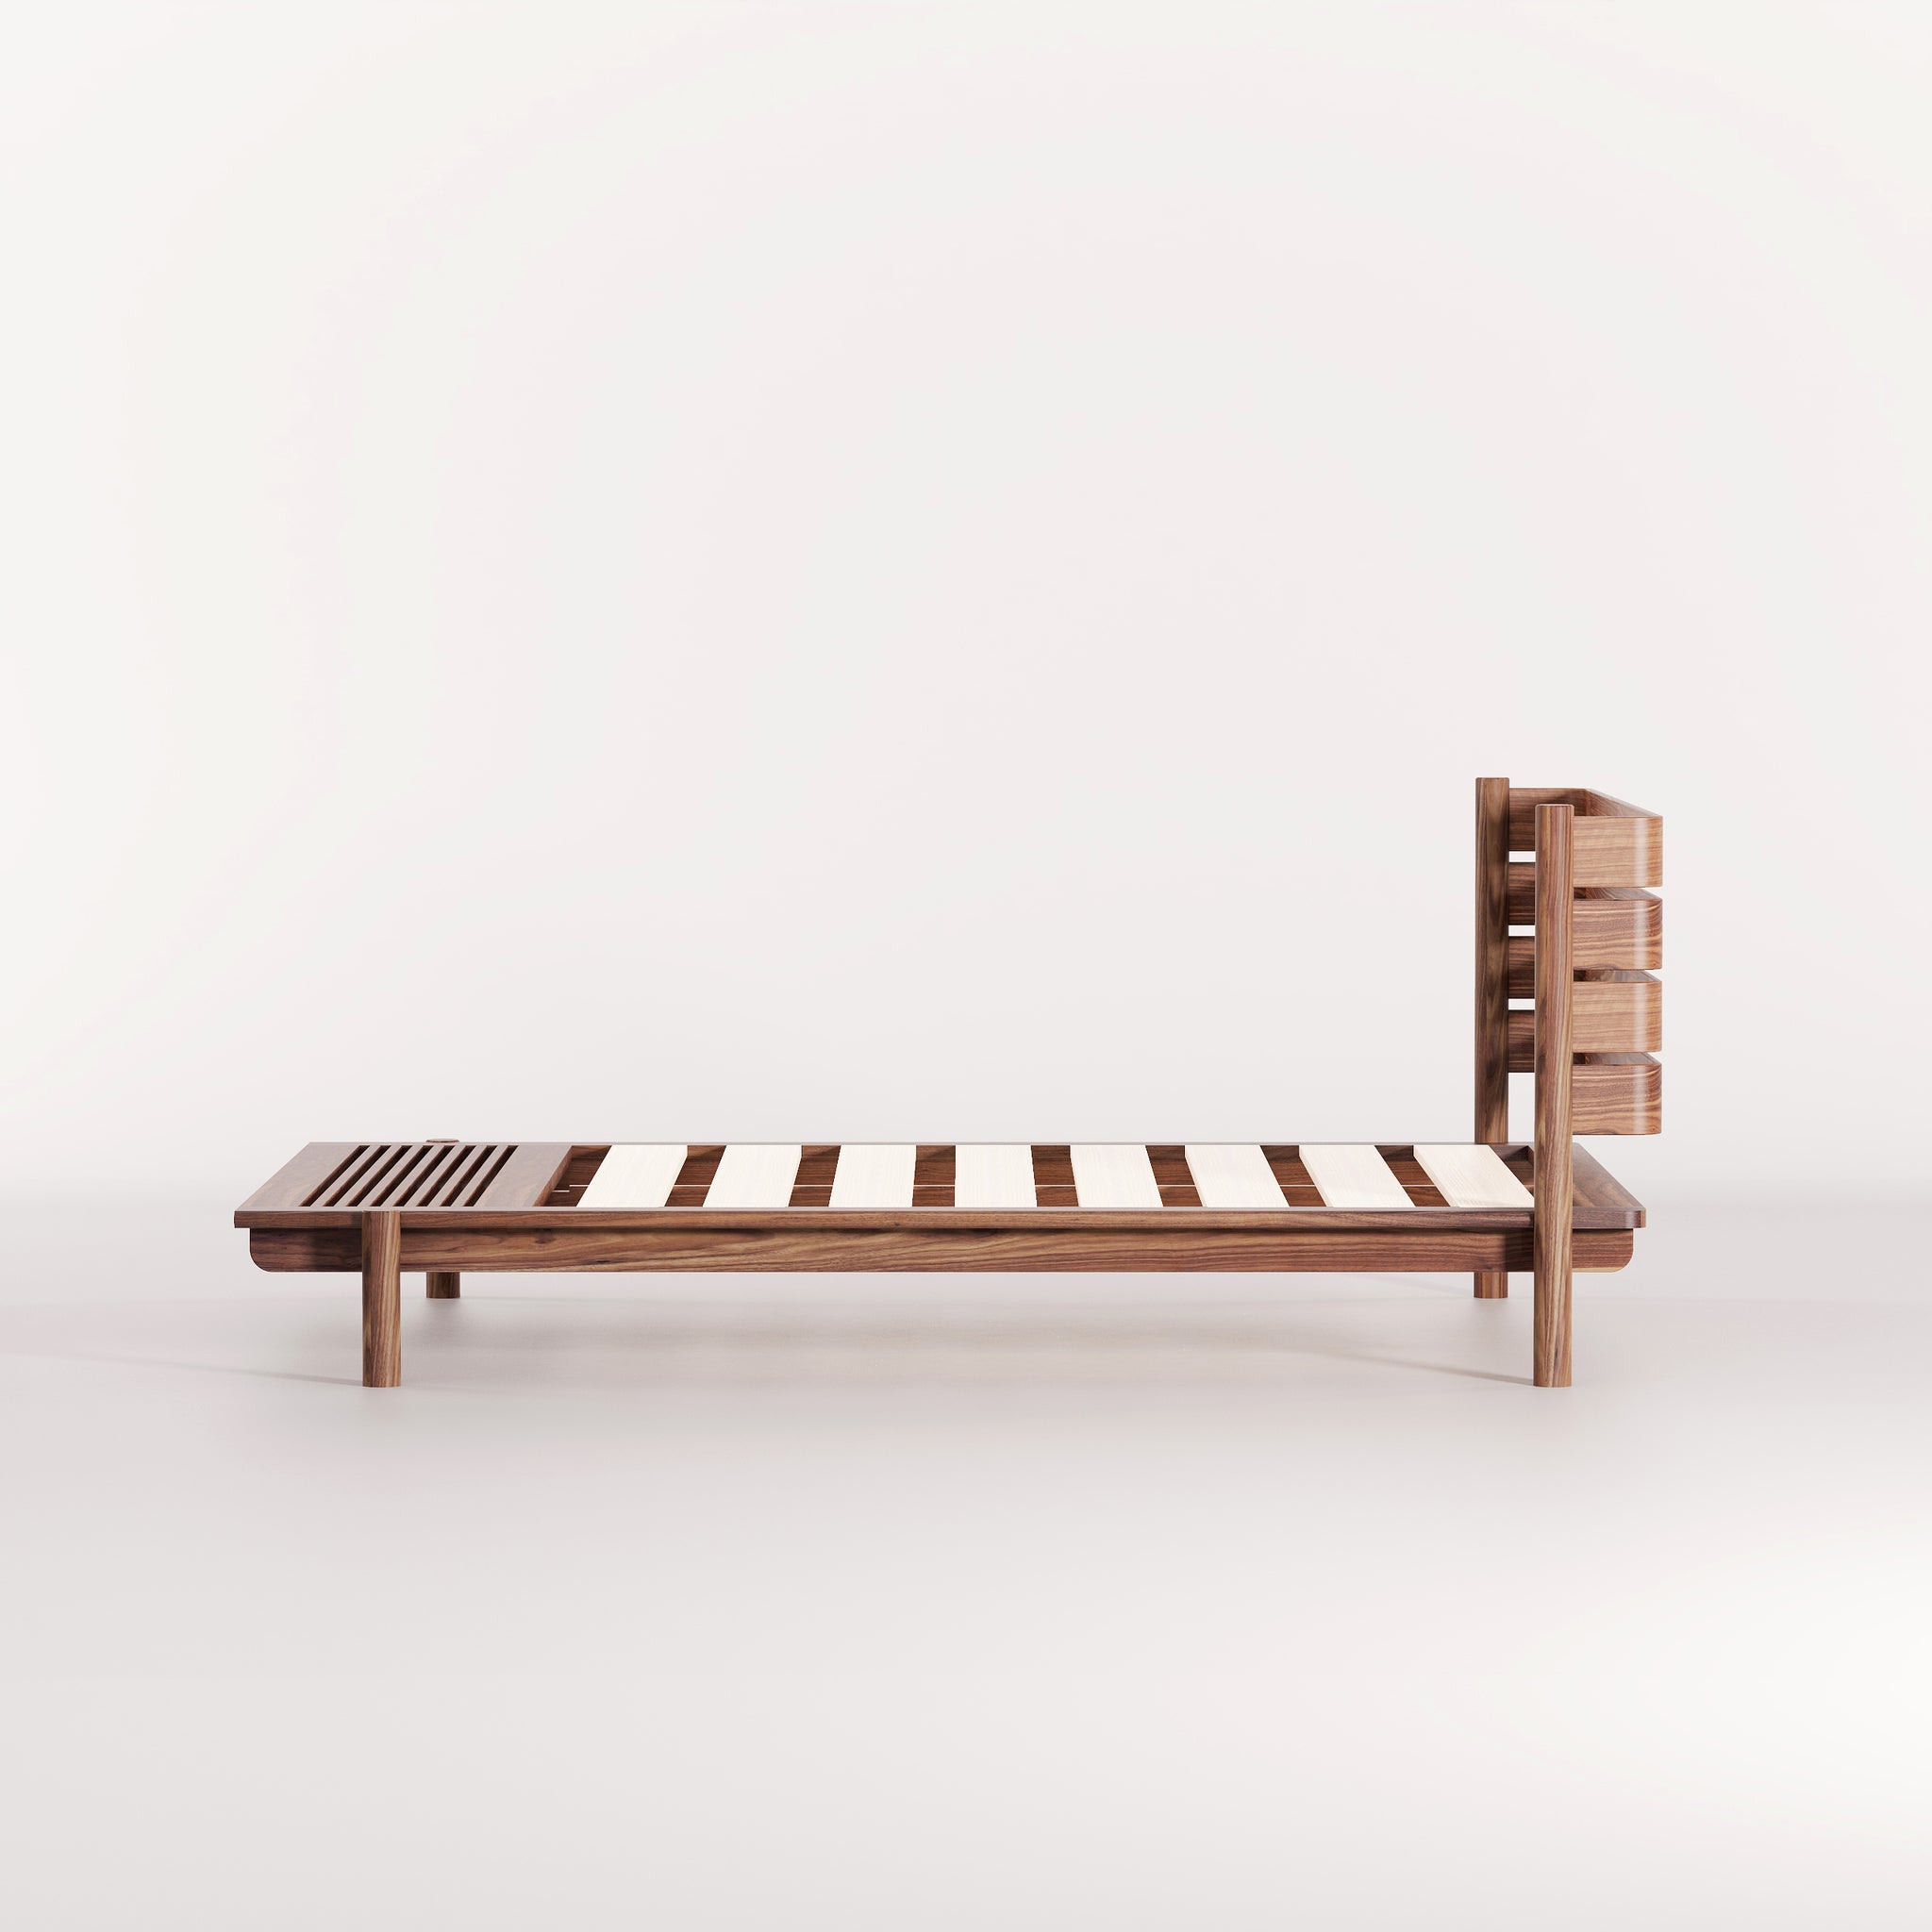 A modern, Australian made, timber bed with a headboard and bench seat.